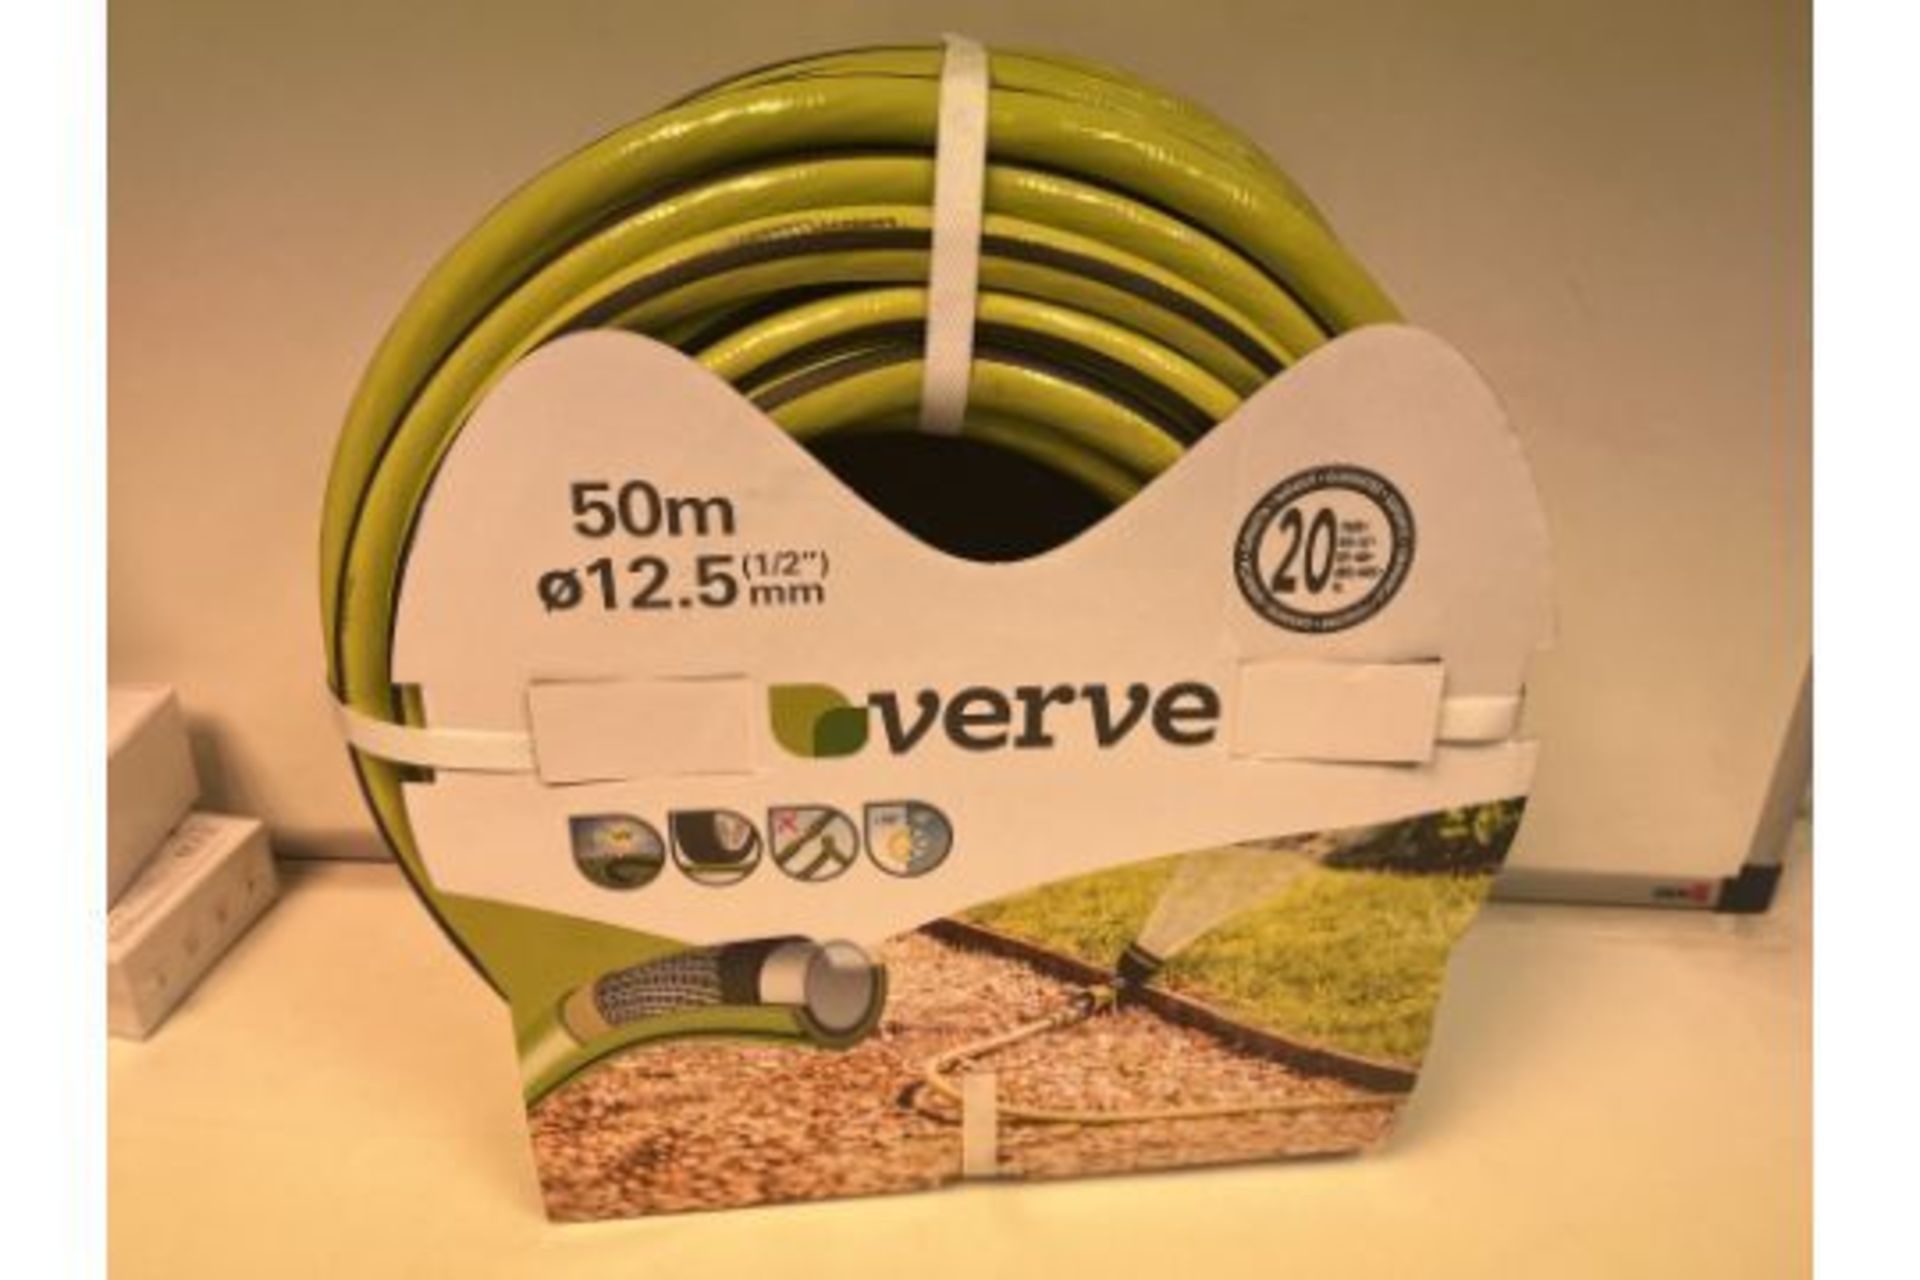 2 X NEW PACKAGED VERVE 50M (12.5MM THICK) HEAVY DUTY HOSE PIPES (ROW5)